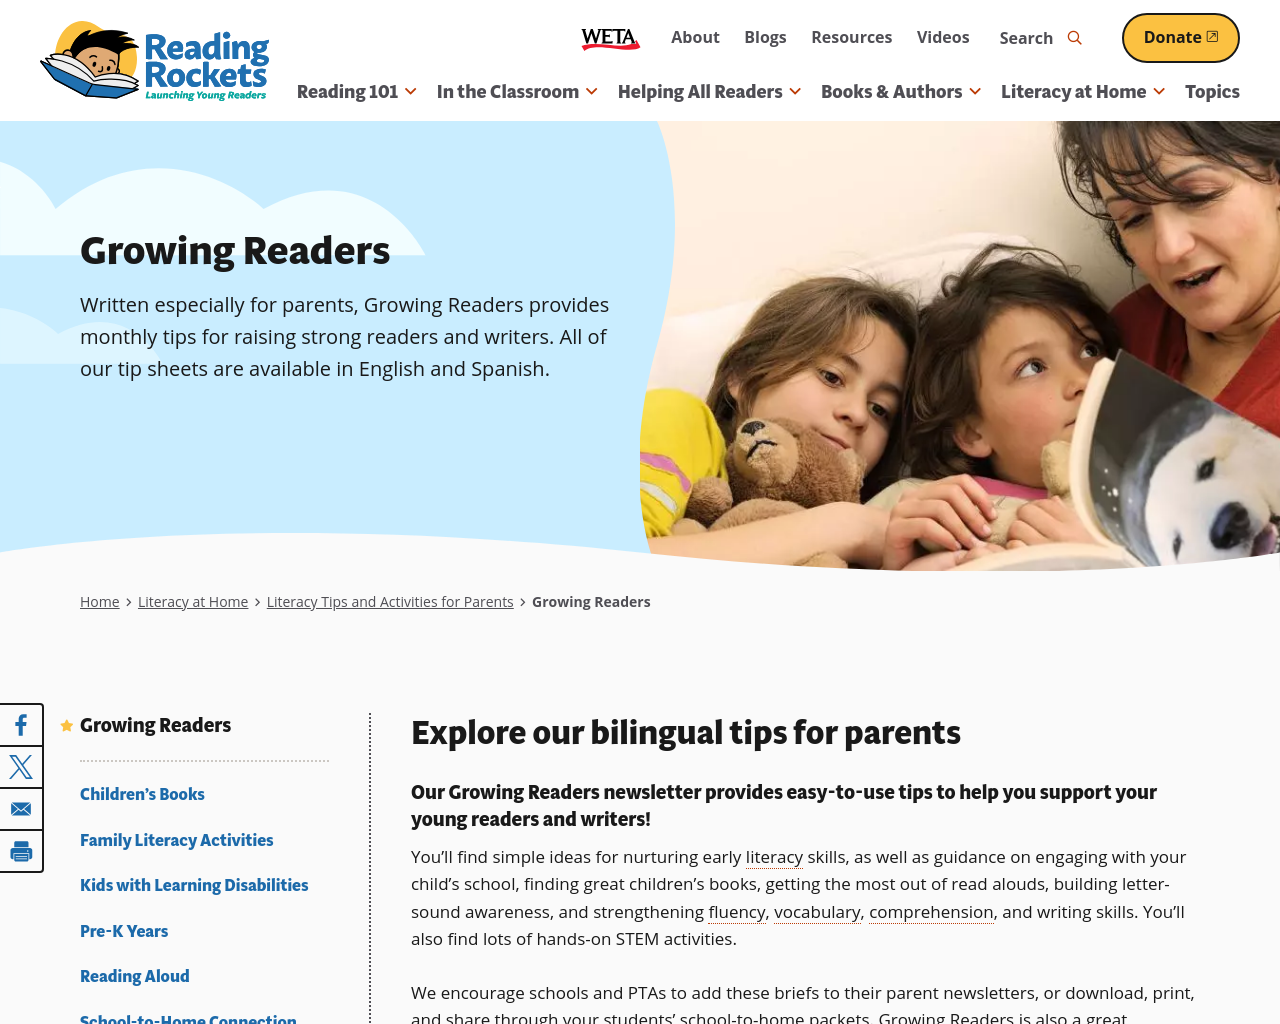 Parents and Reading